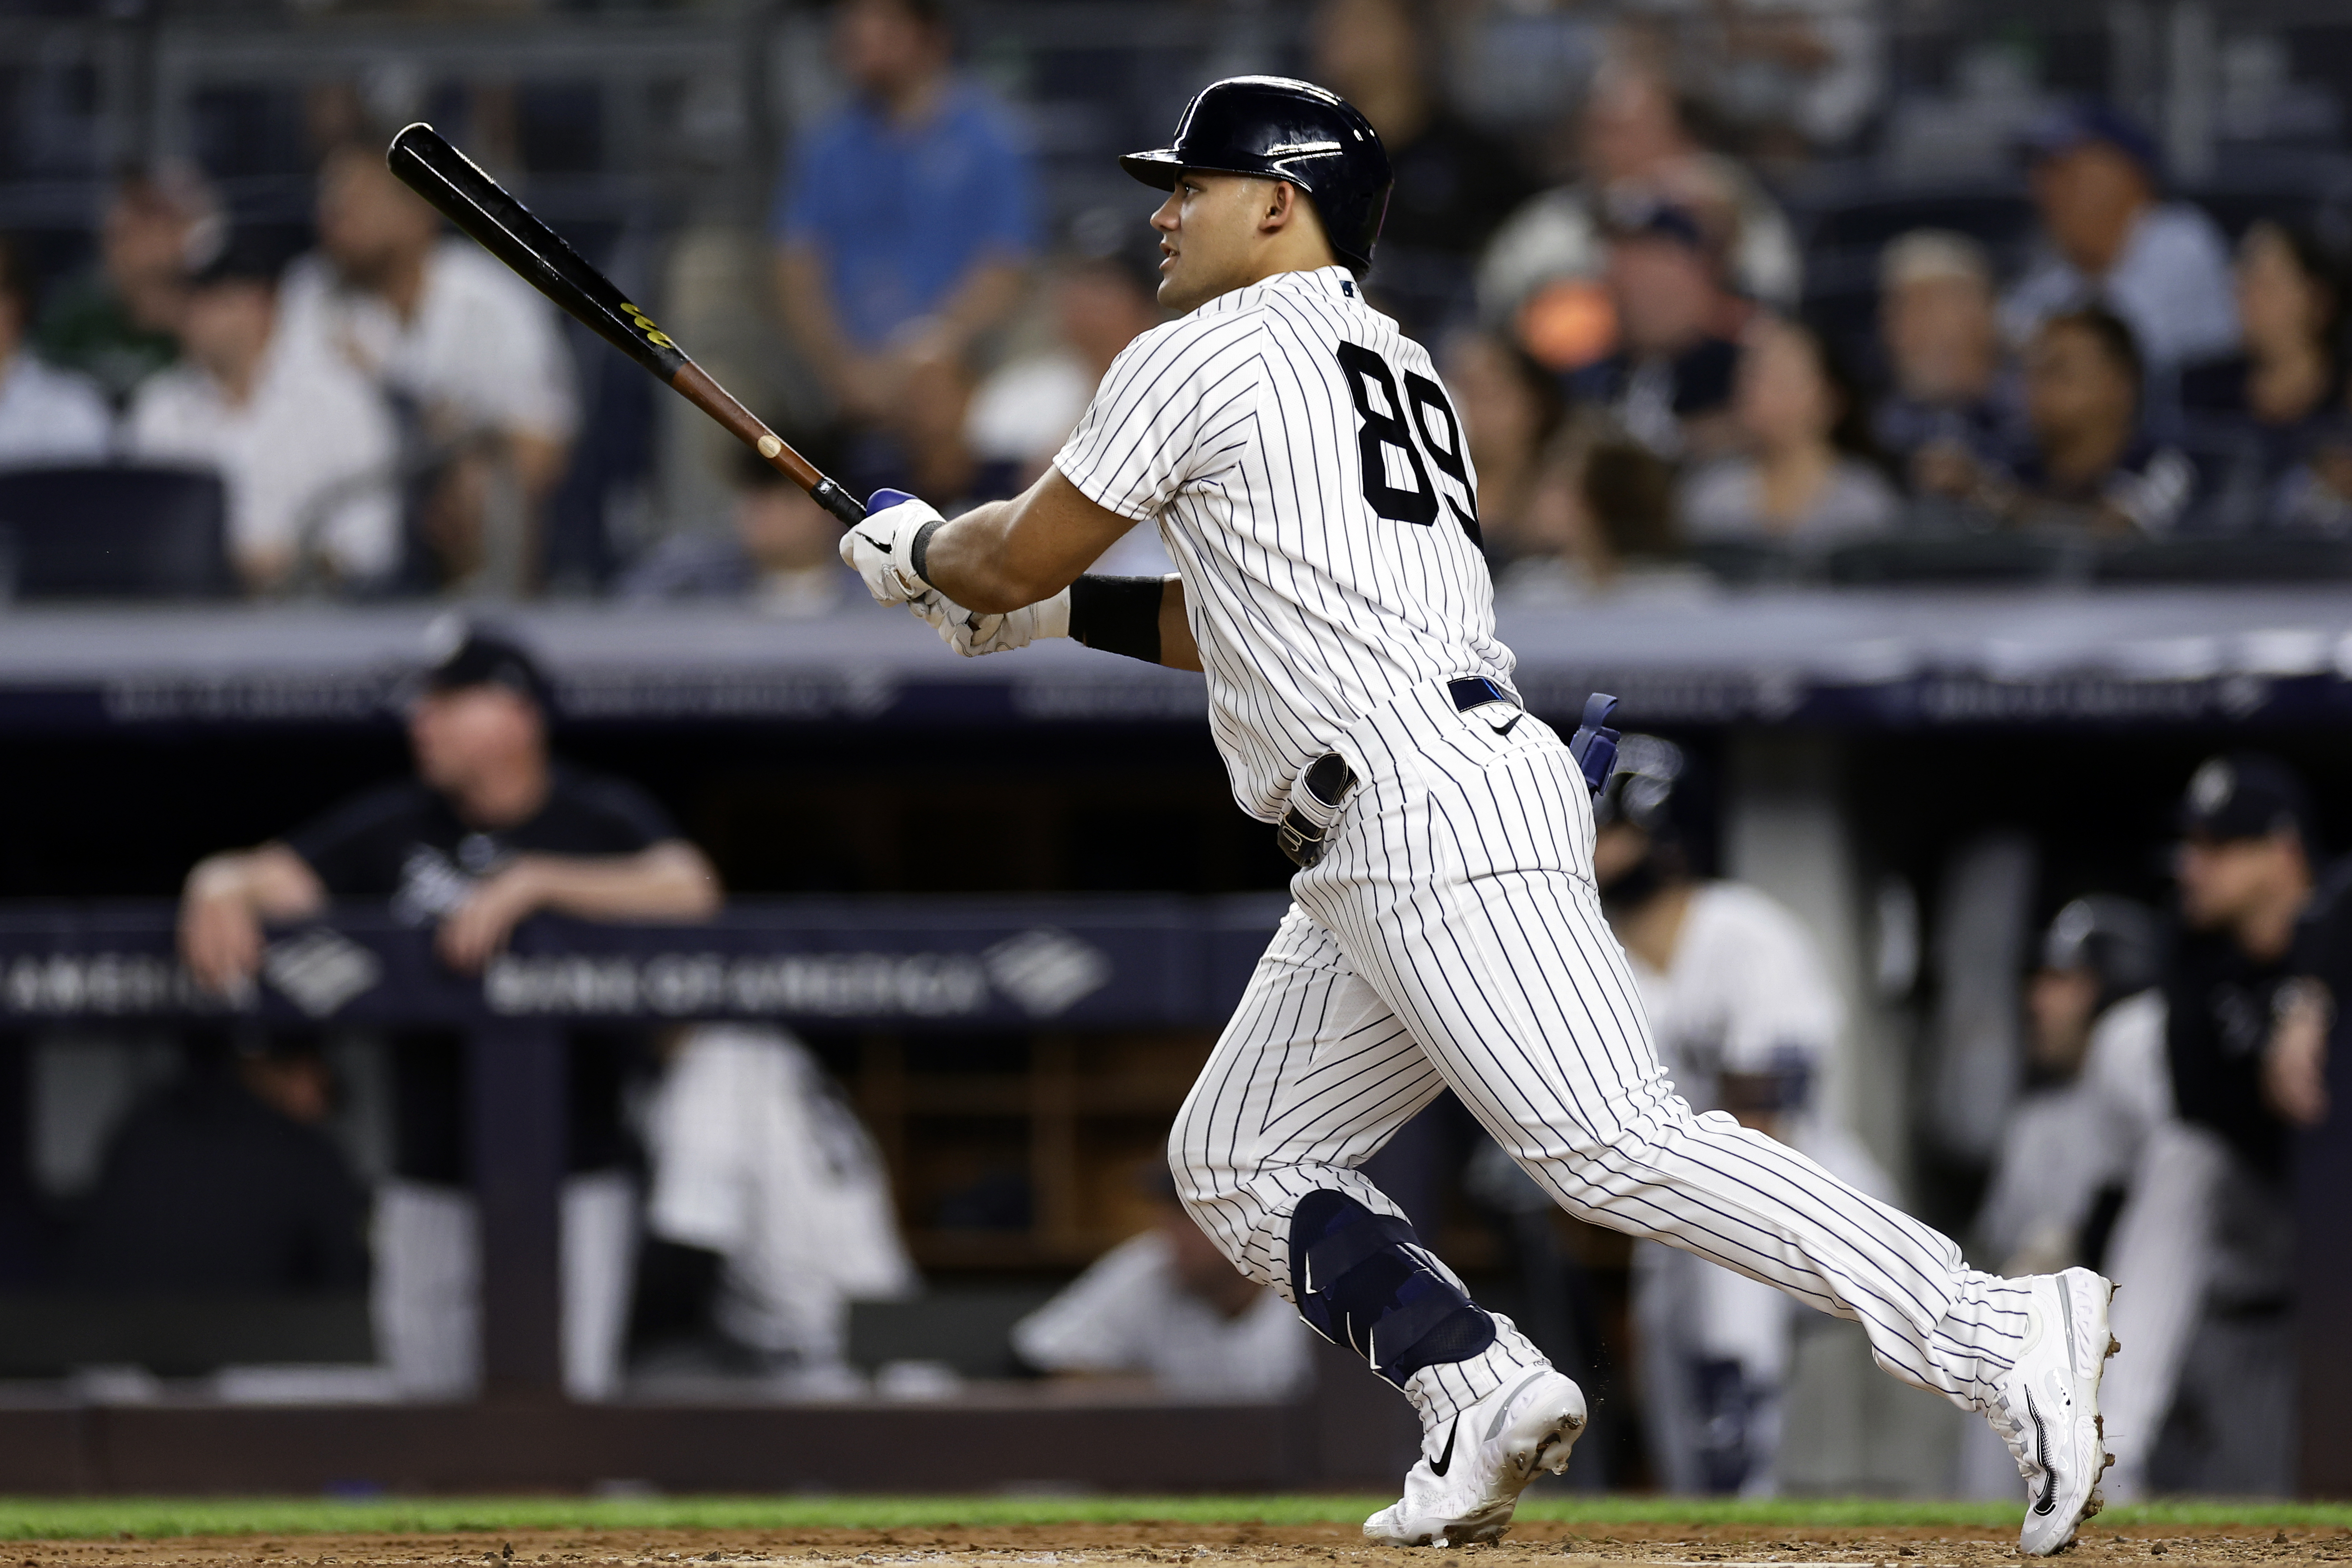 Jasson Domínguez's first homer in New York helps Yankees get back